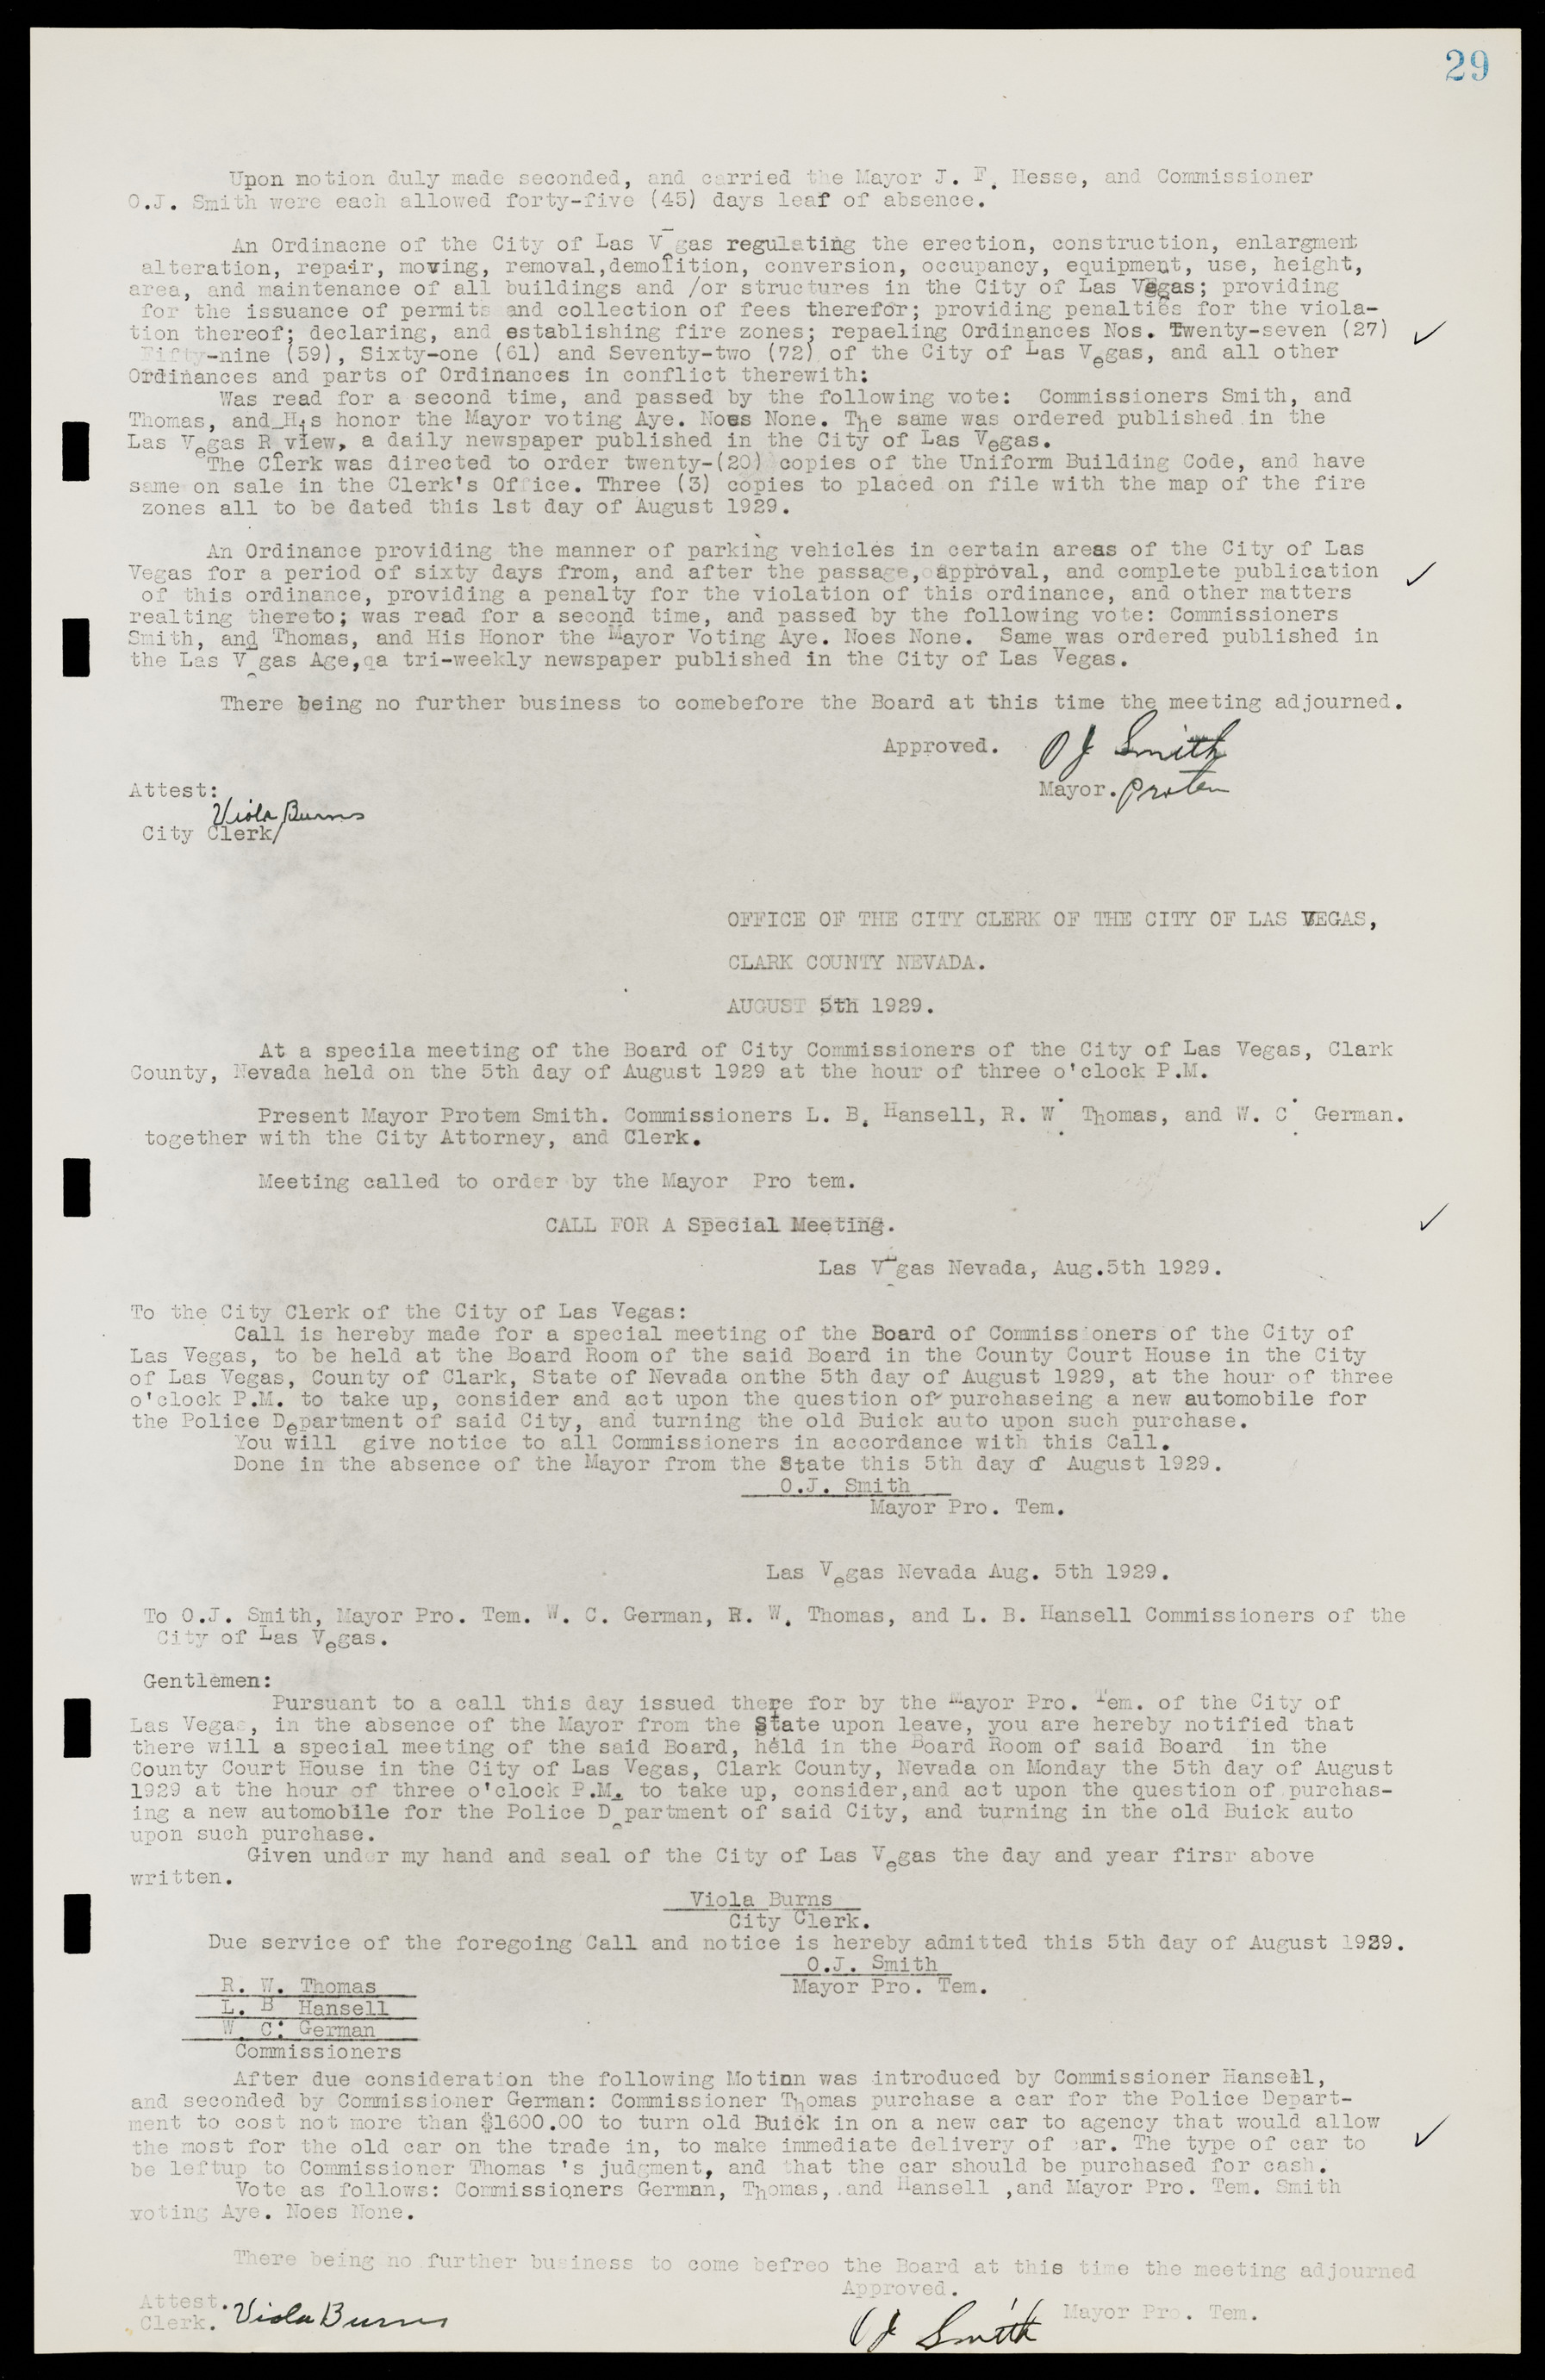 Las Vegas City Commission Minutes, May 14, 1929 to February 11, 1937, lvc000003-35